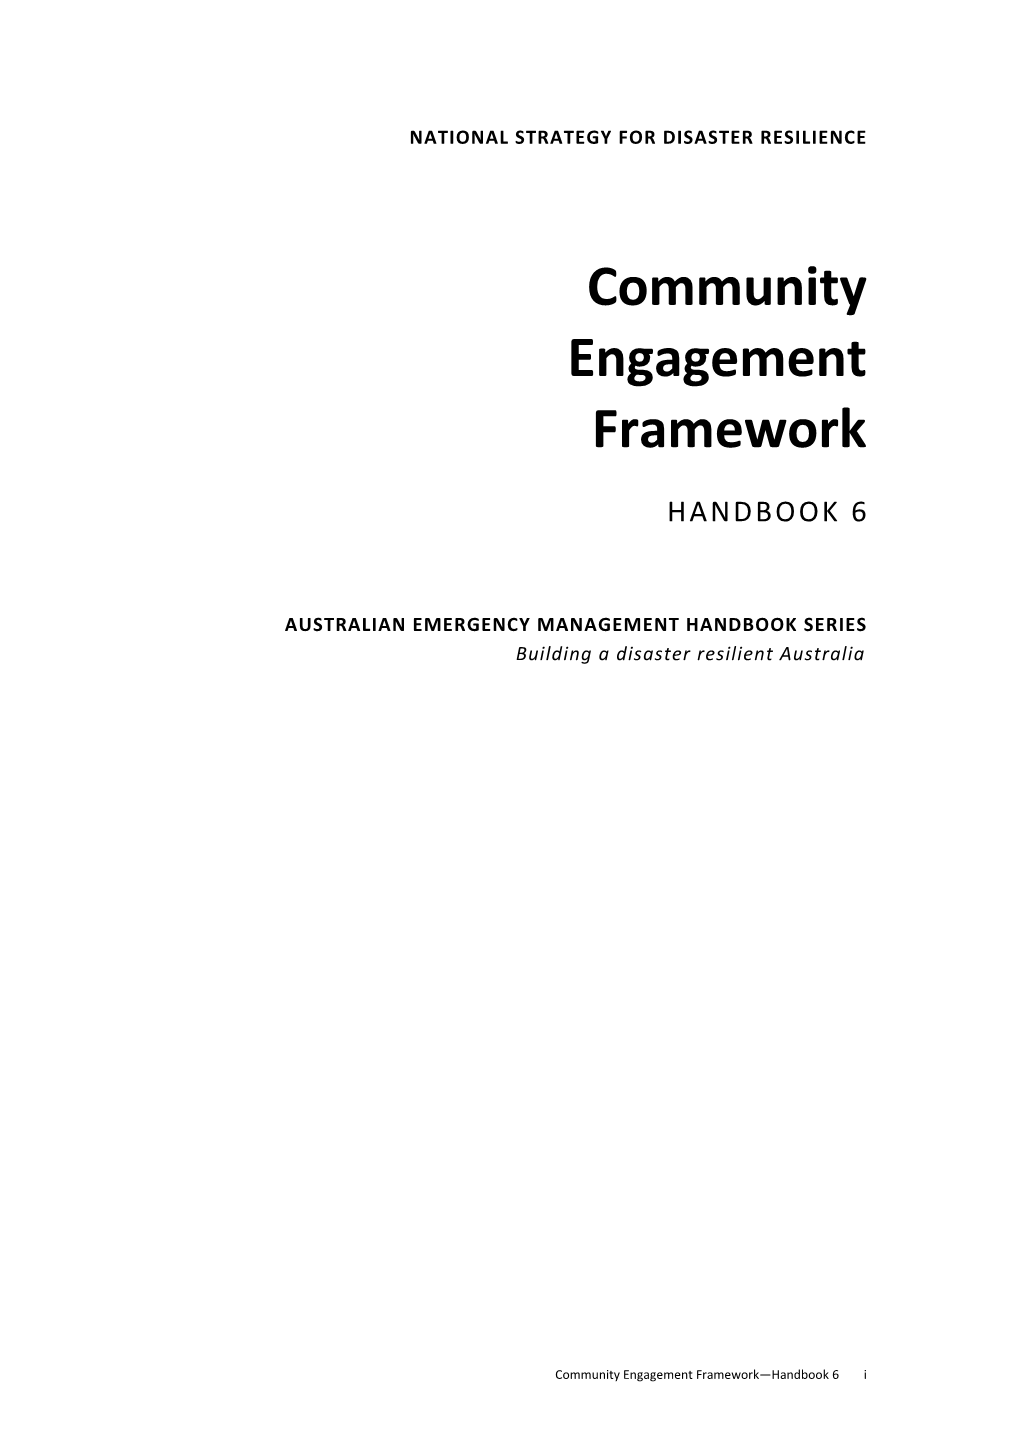 National Strategy for Disaster Resilience Community Engagement Framework